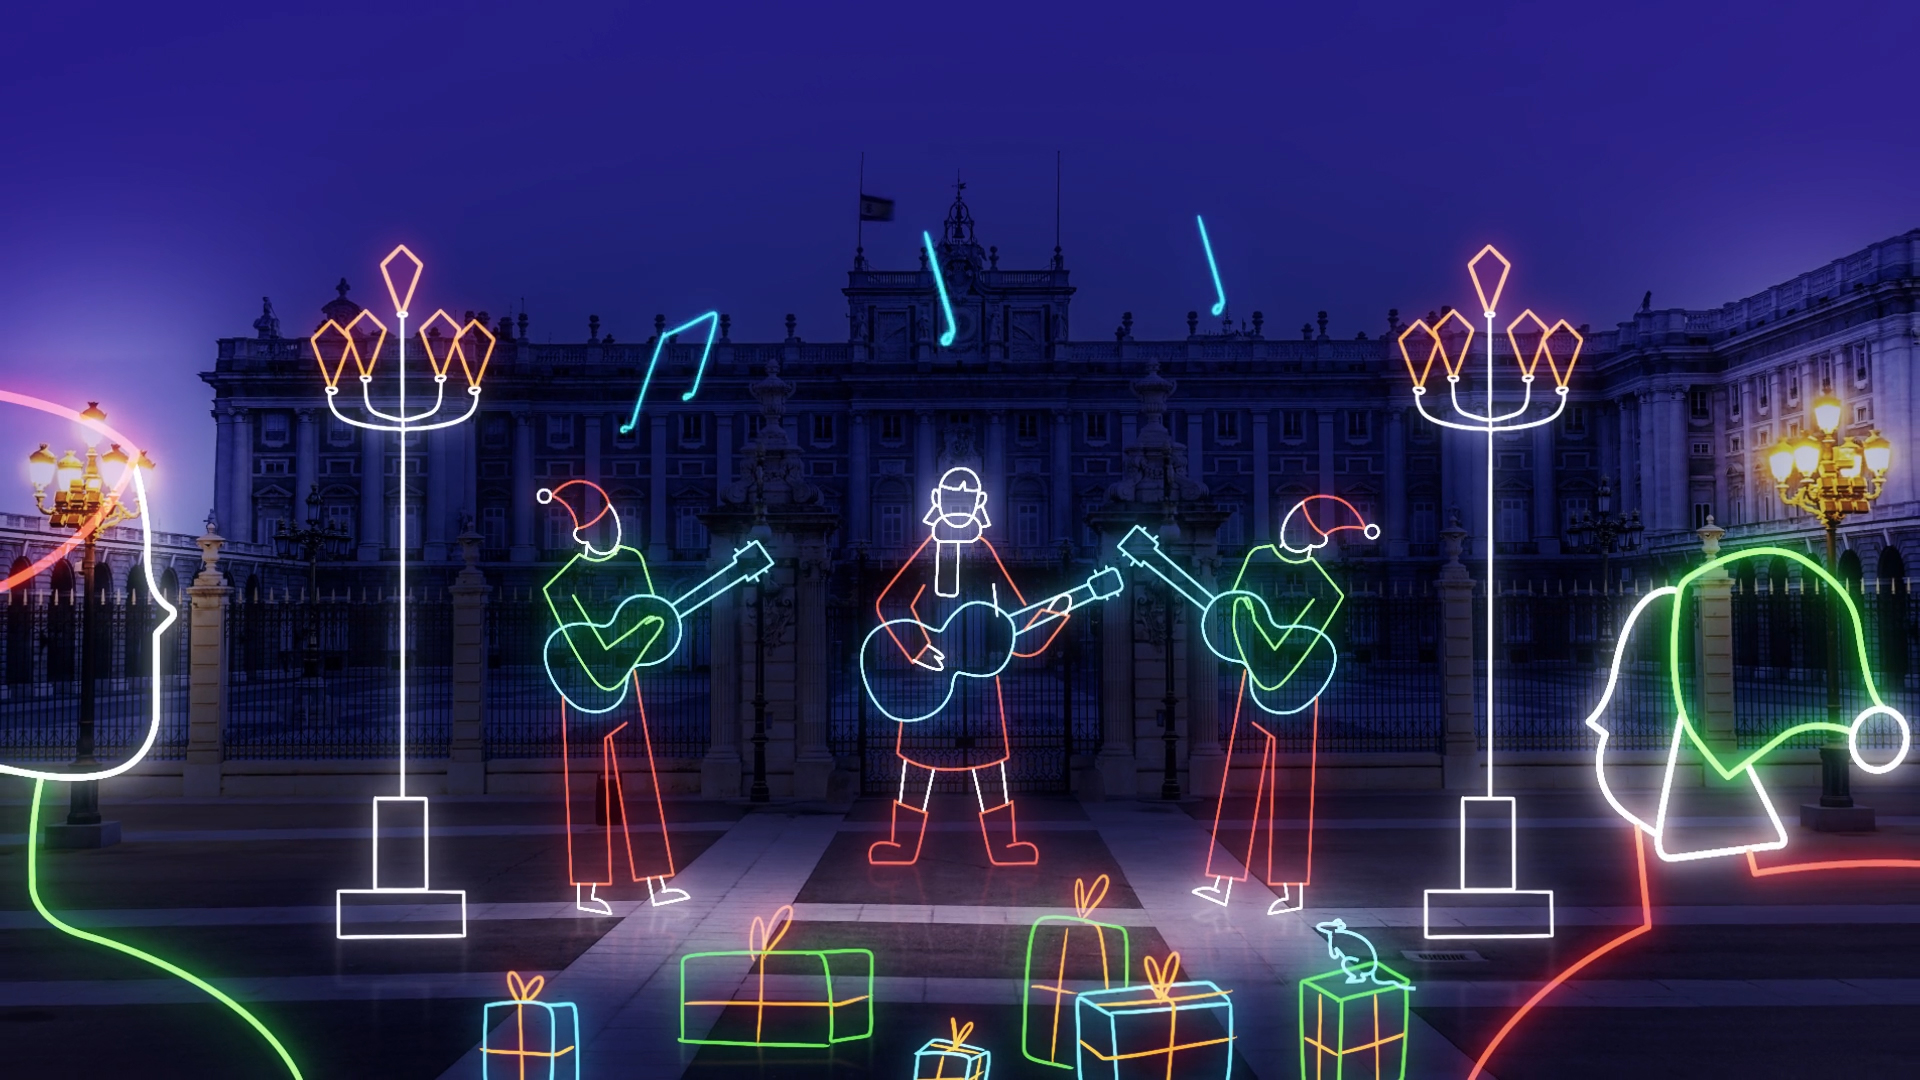 Illustration of neon band playing in front of palace